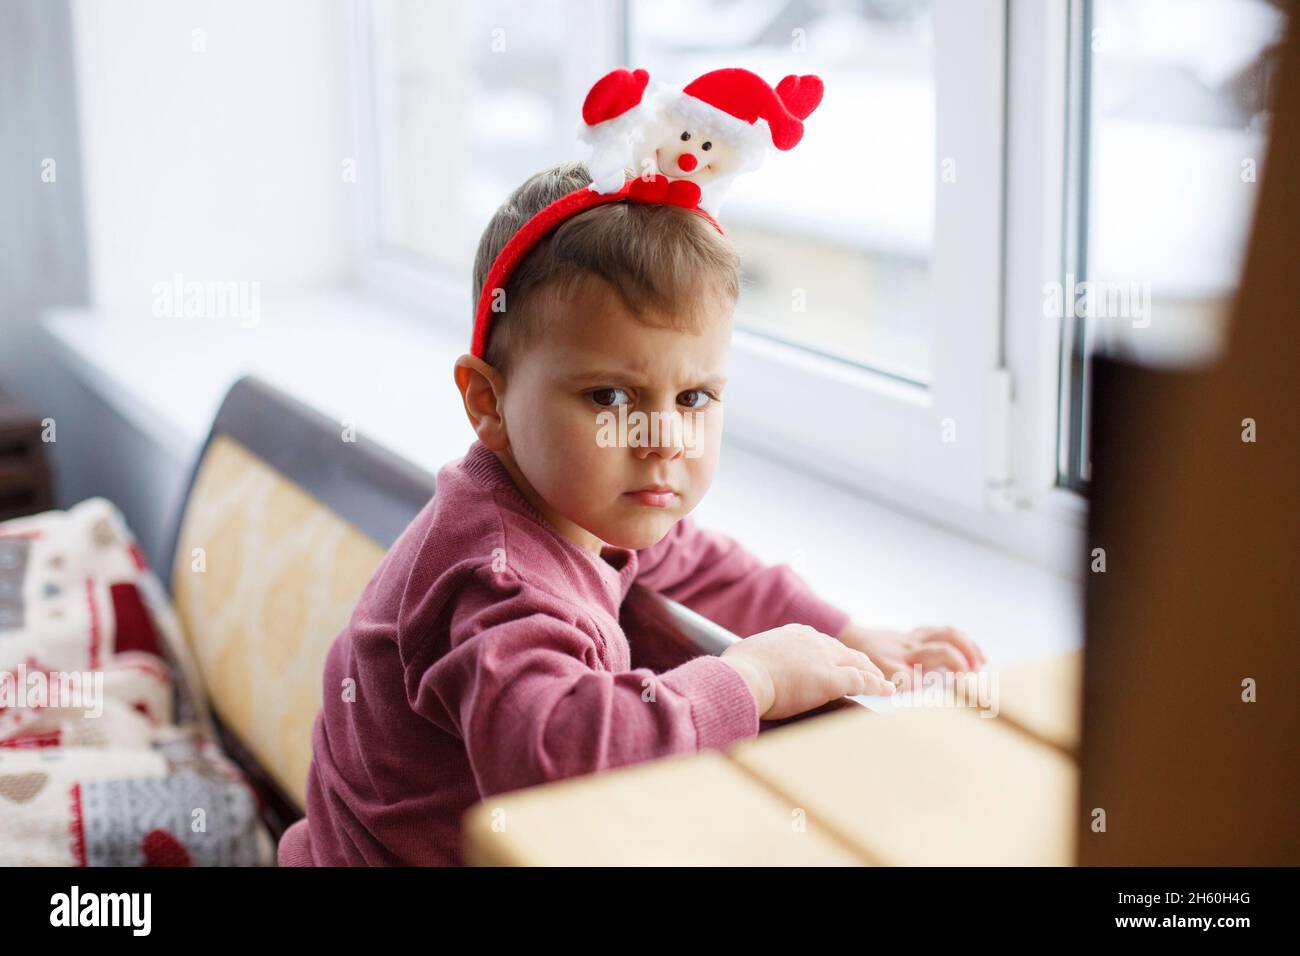 Cute angry little boy with fanny hat looking to camera. Cute toddler child near window. Stock Photo